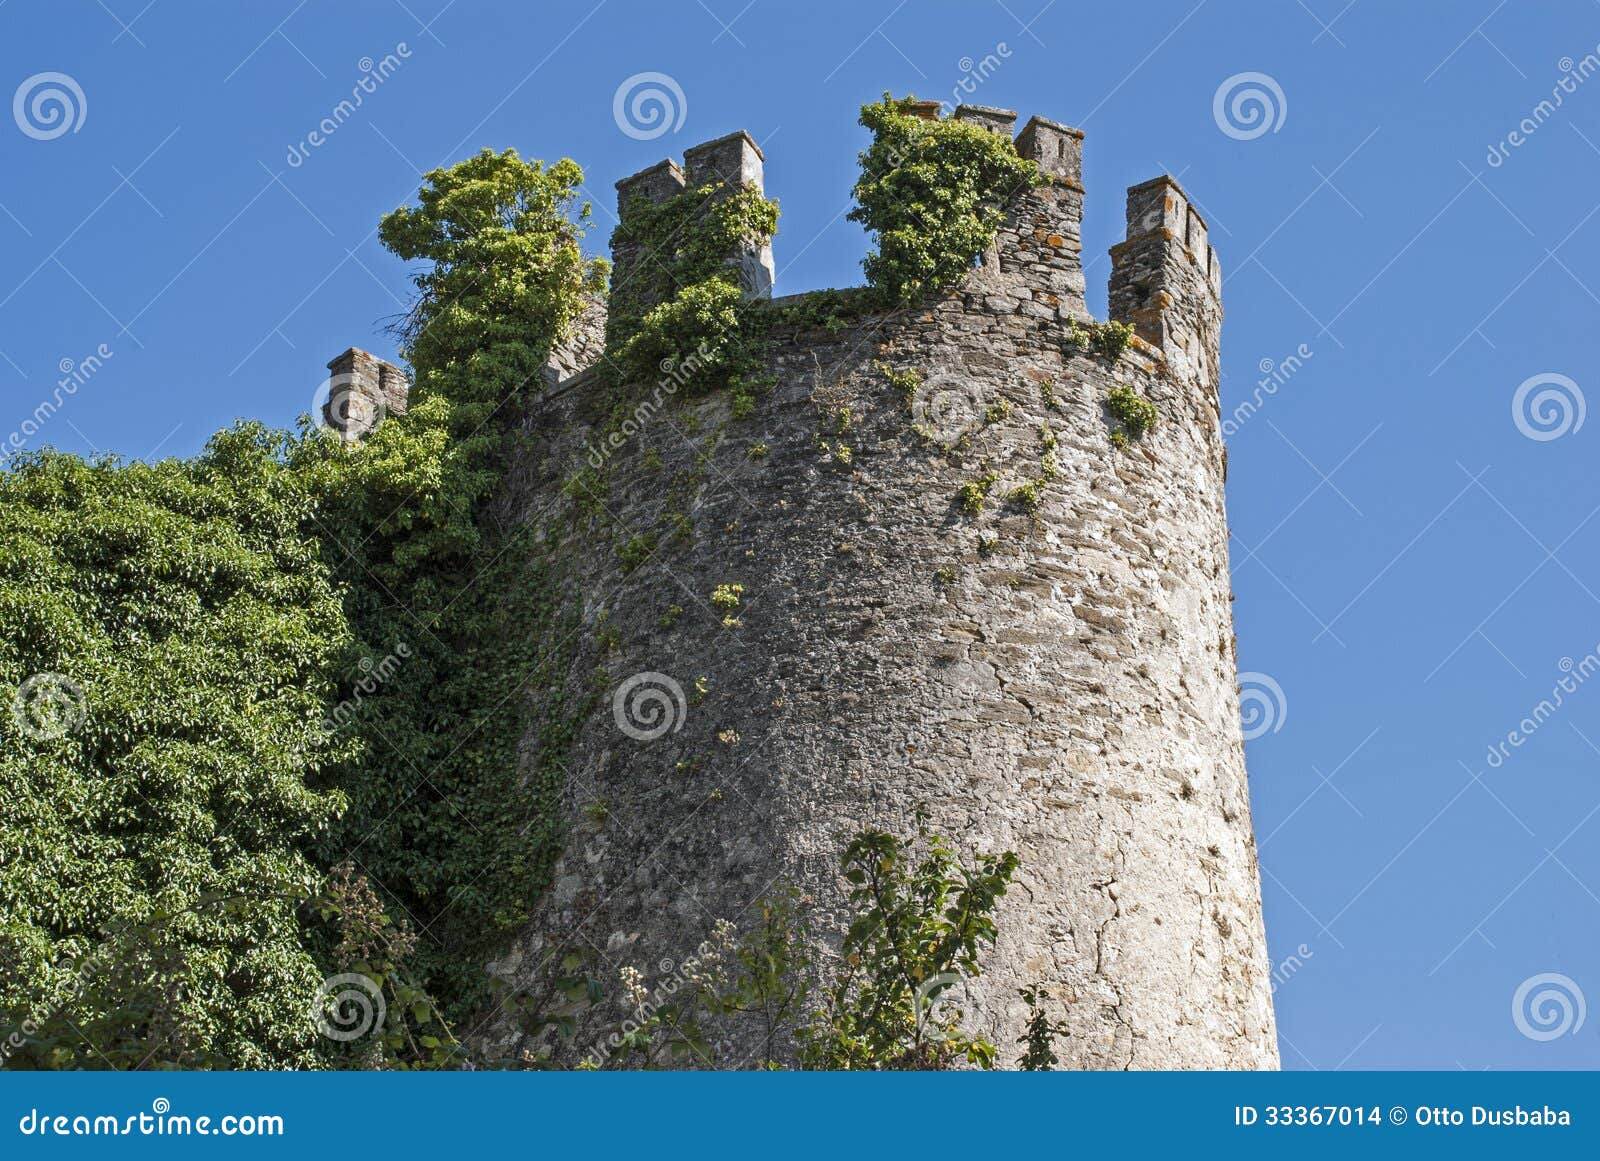 ancient castle tower in galicia